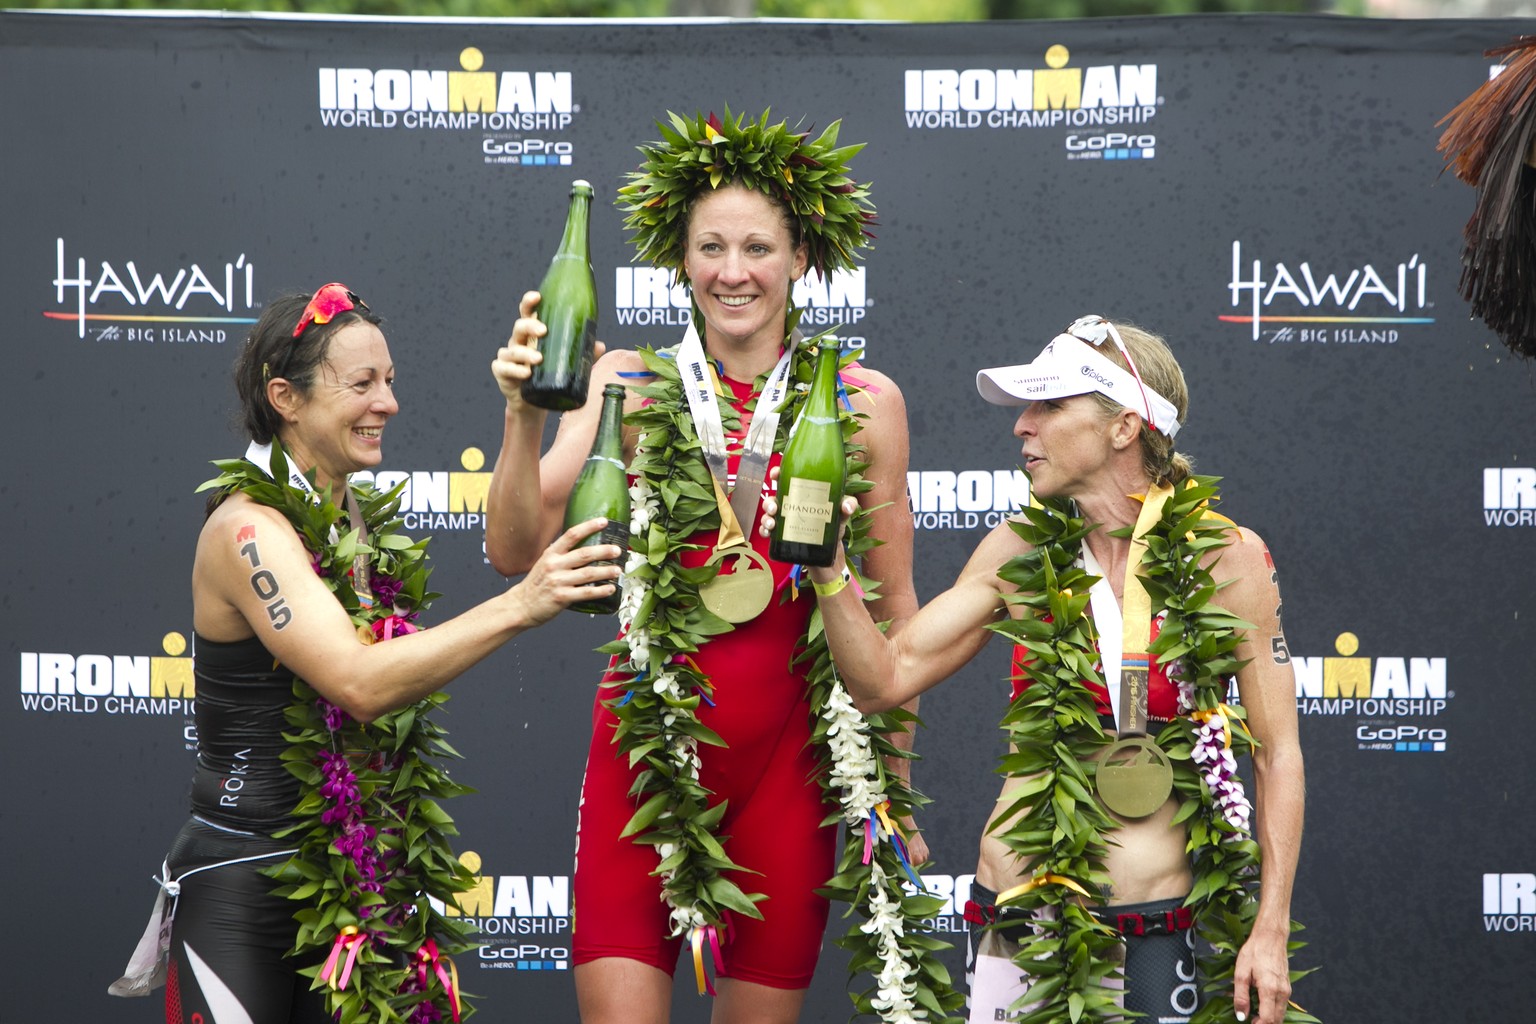 IMAGE DISTRIBUTED FOR IRONMAN - (L-R) Rachel Joyce, of England, Daniela Ryf, of Switzerland, and Liz Blatchford, of Australia, celebrate after finishing top three in the women&#039;s 2015 IRONMAN Worl ...